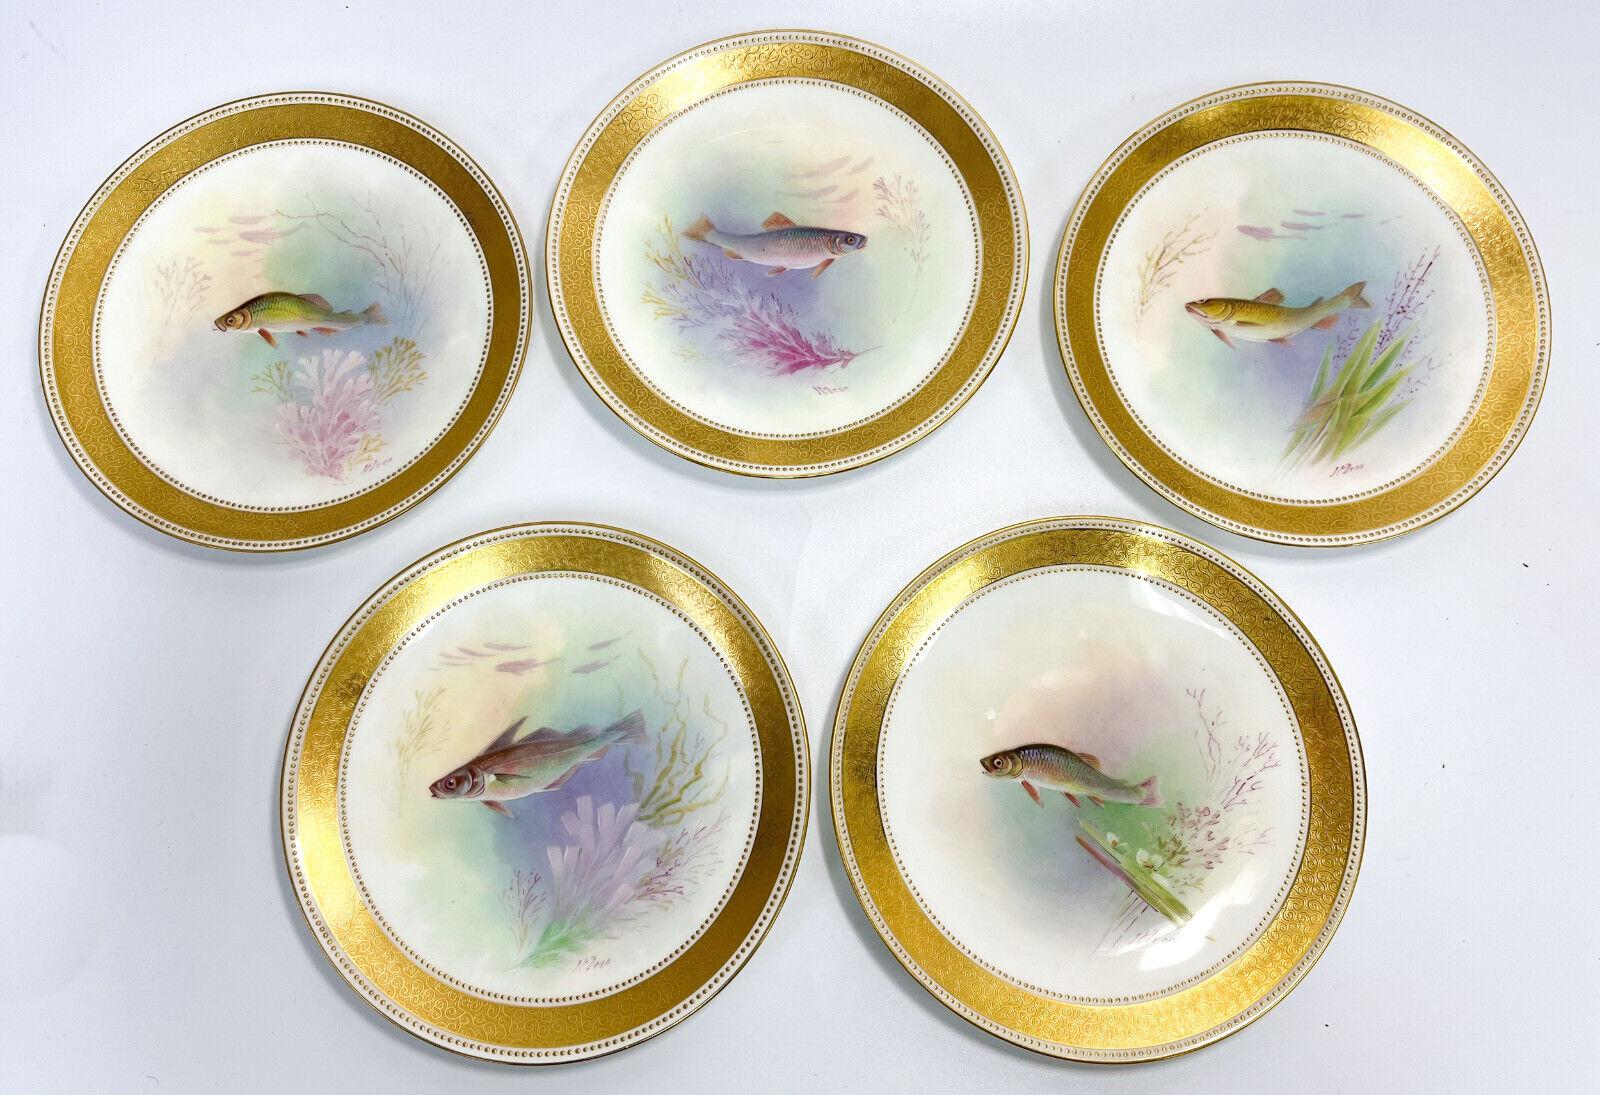 Hand-Painted Set of 11 Minton England Porcelain Hand Painted Fish Cabinet Plates, circa 1905